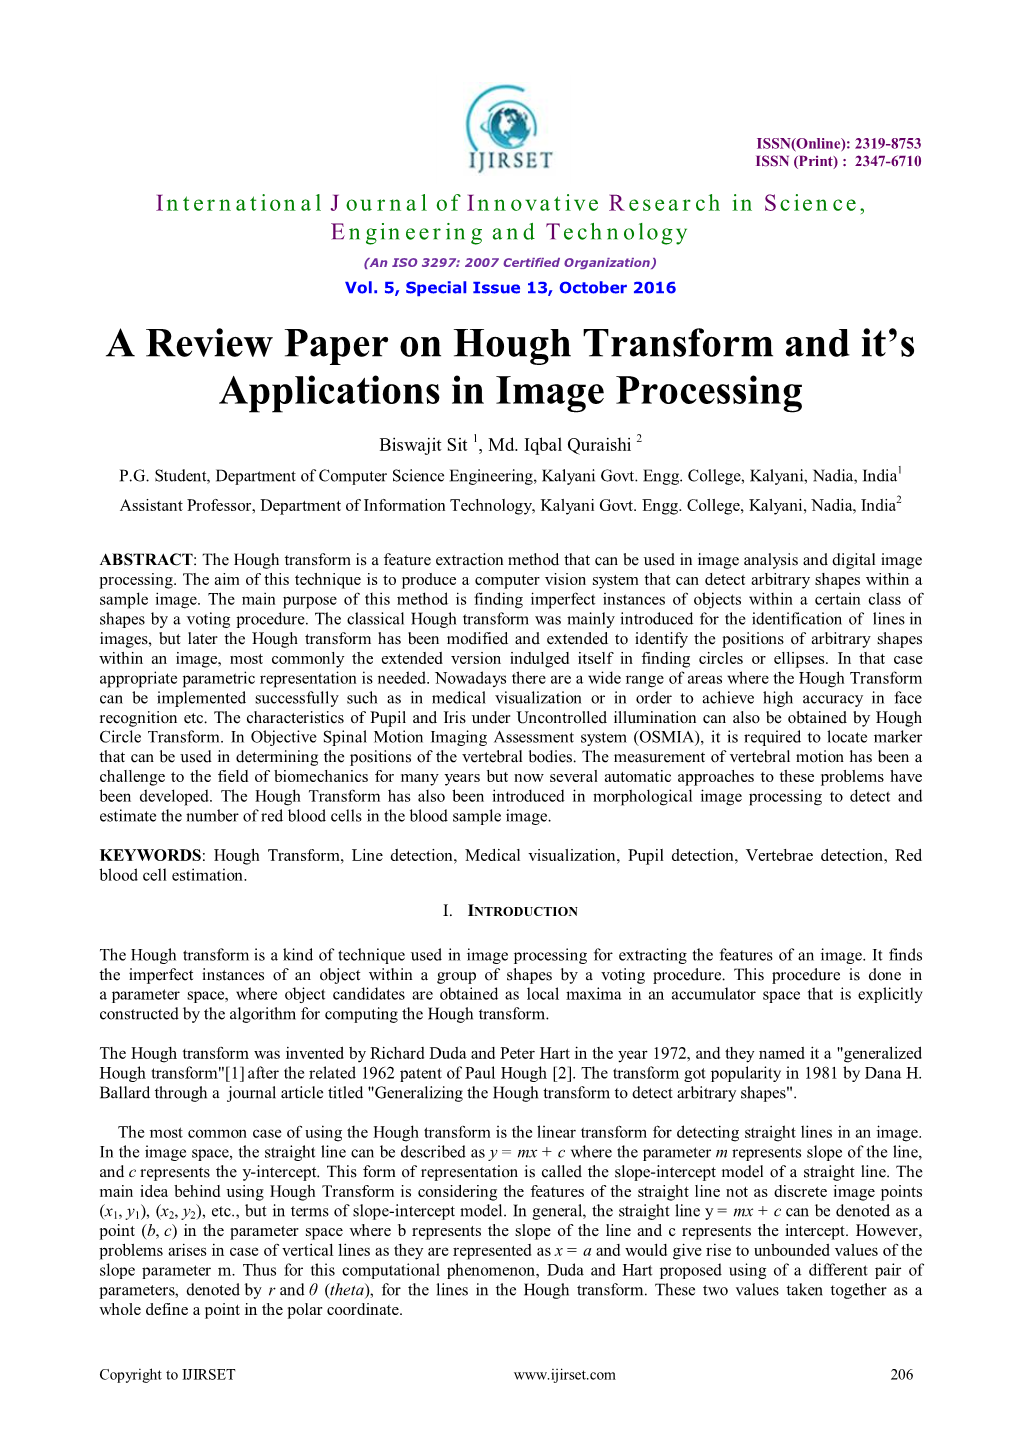 A Review Paper on Hough Transform and It's Applications in Image